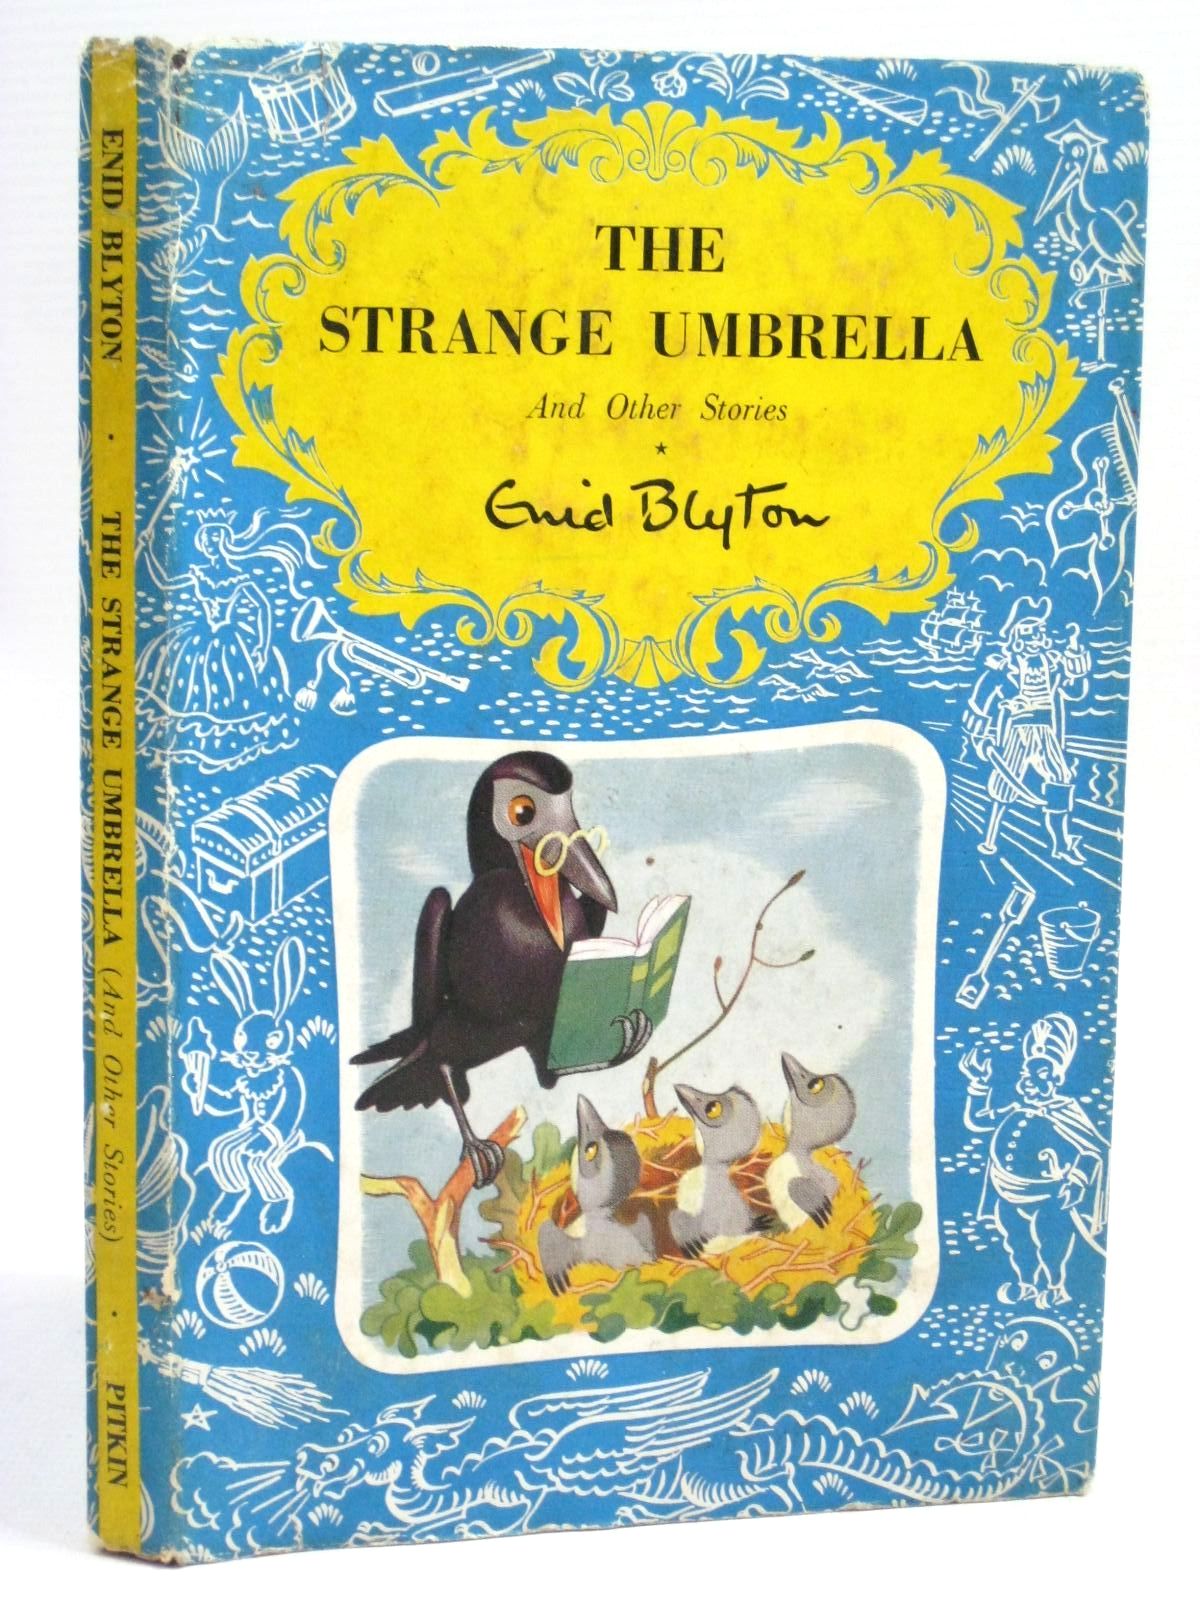 Cover of THE STRANGE UMBRELLA AND OTHER STORIES by Enid Blyton